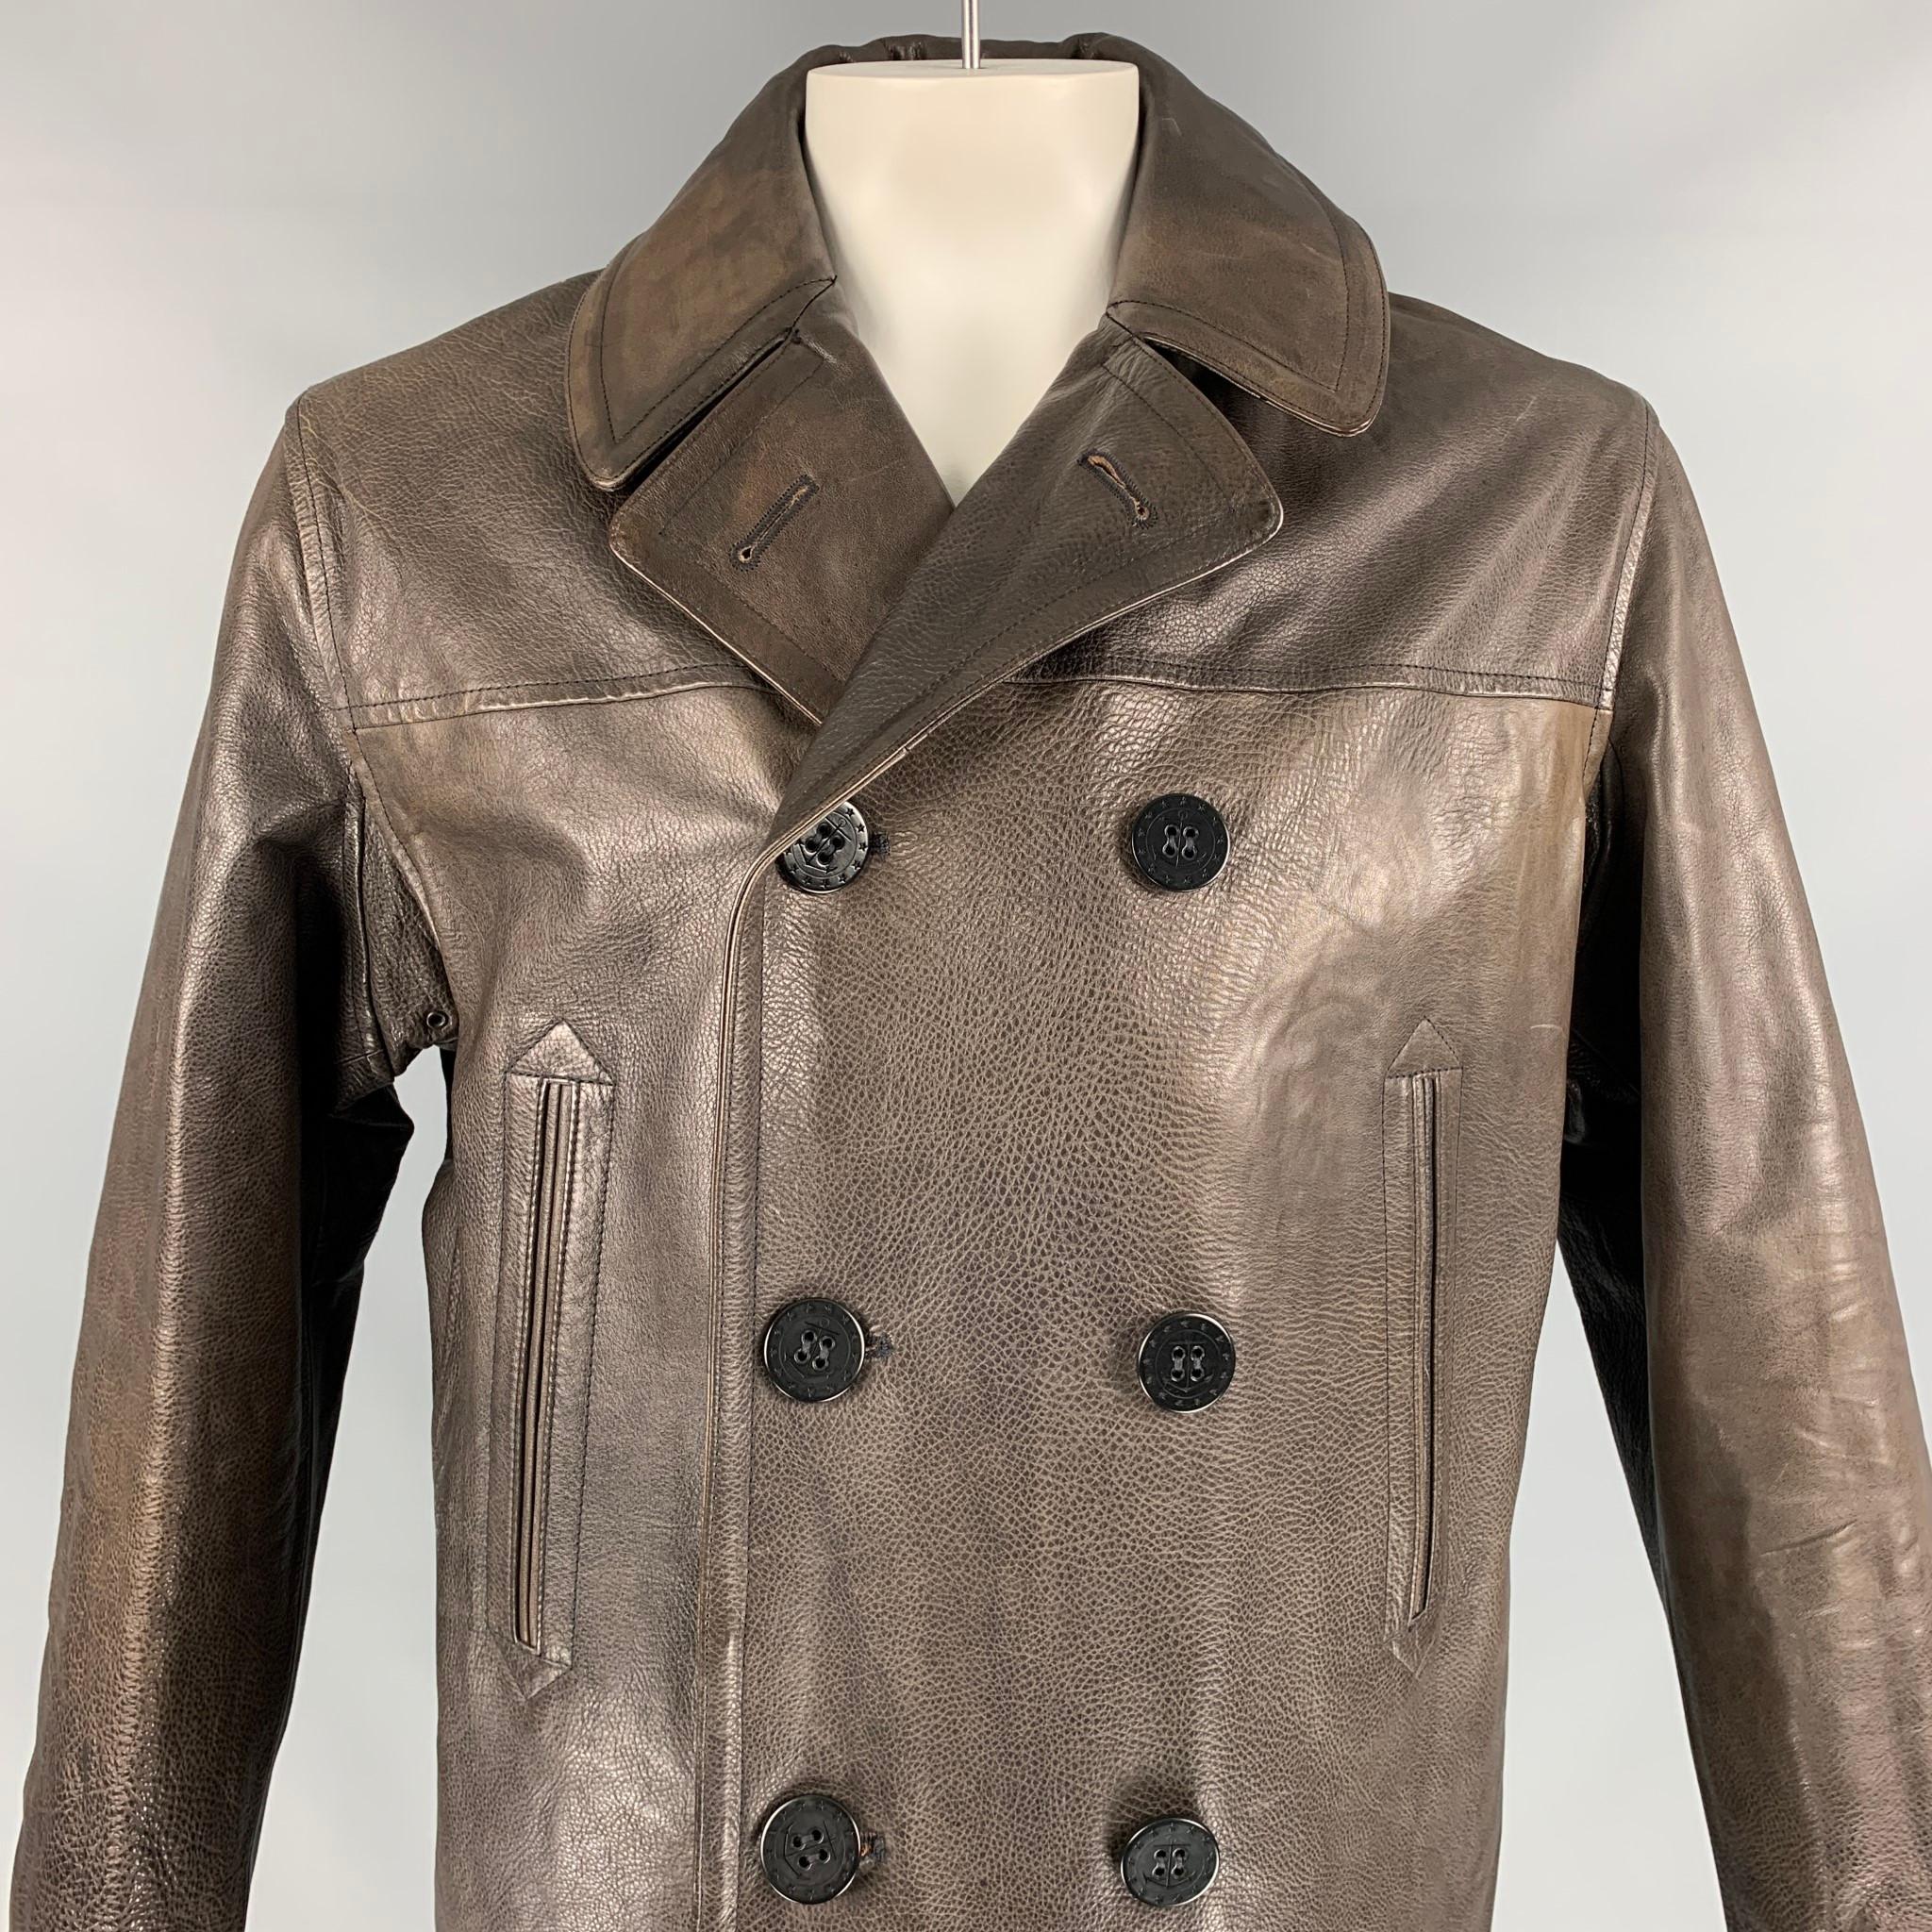 RRL by RALPH LAUREN pea coat comes in a brown leather with a full liner featuring a pointed collar, single back vent, slit pockets, and a double breasted closure.

Very Good Pre-Owned Condition.
Marked: XL

Measurements:

Shoulder: 19 in.
Chest: 44